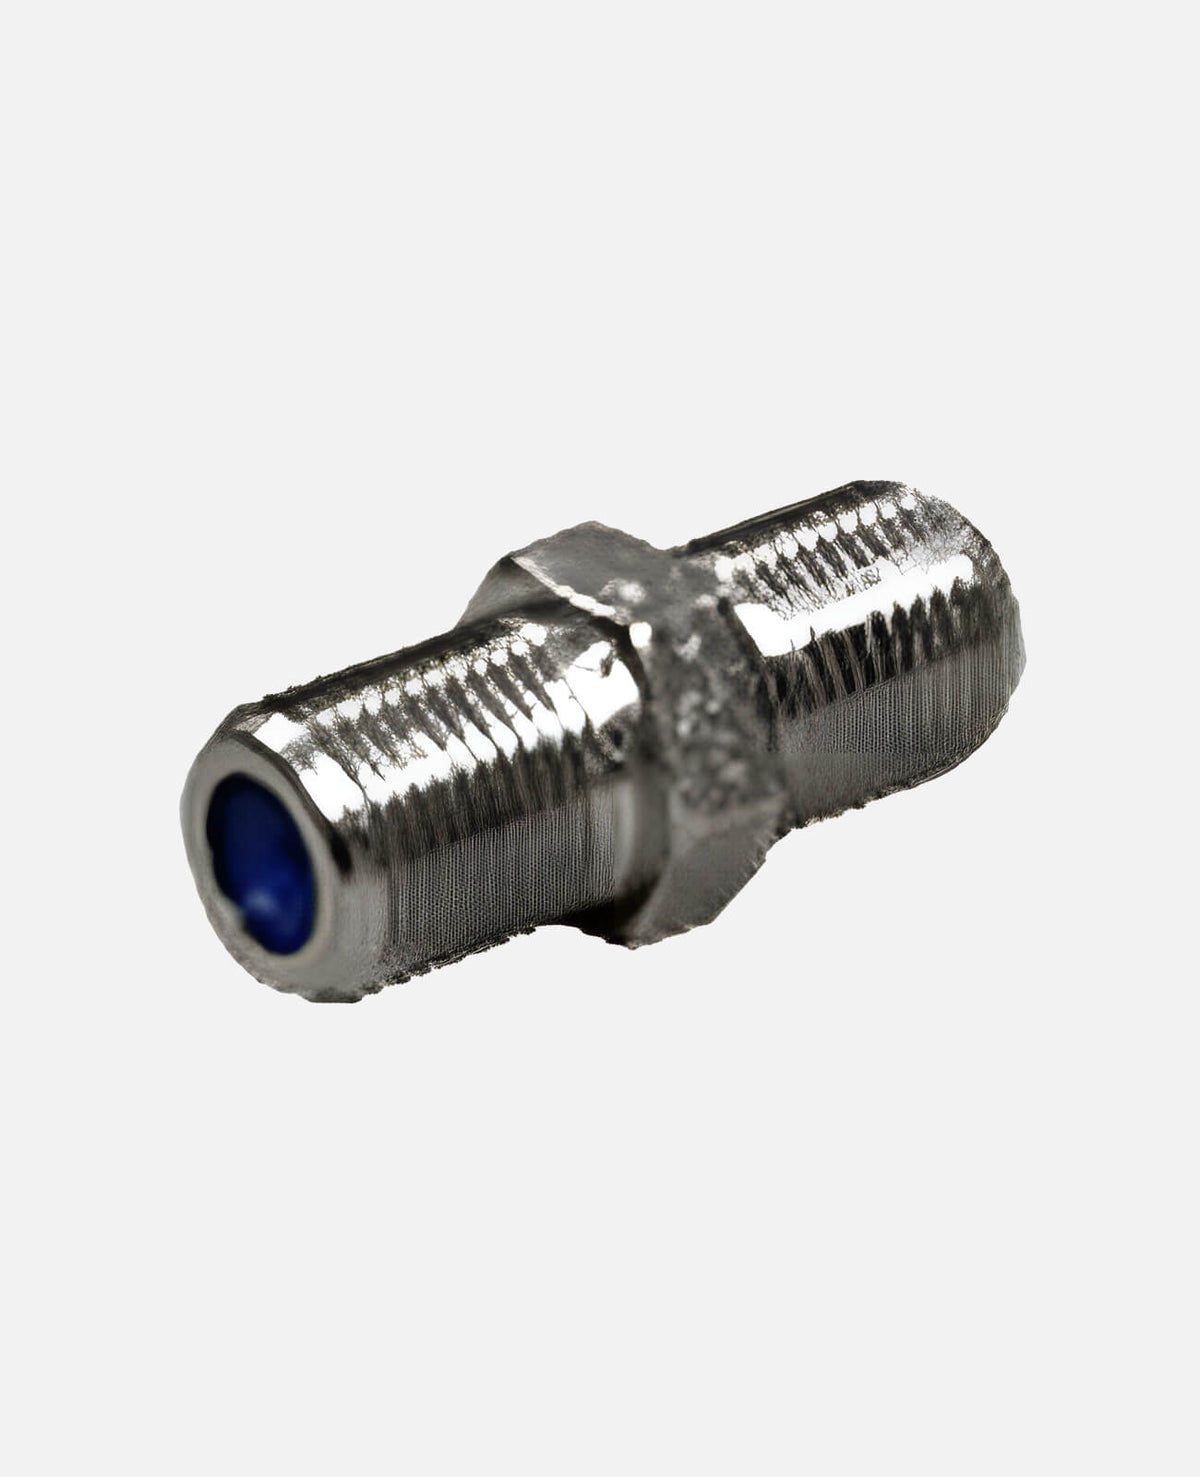 PERFECT VISION HIGH-FREQUENCY 3 GHZ F-81 BARREL CONNECTORS, BAG OF 100 (PV05F81HF), BAG OF 100